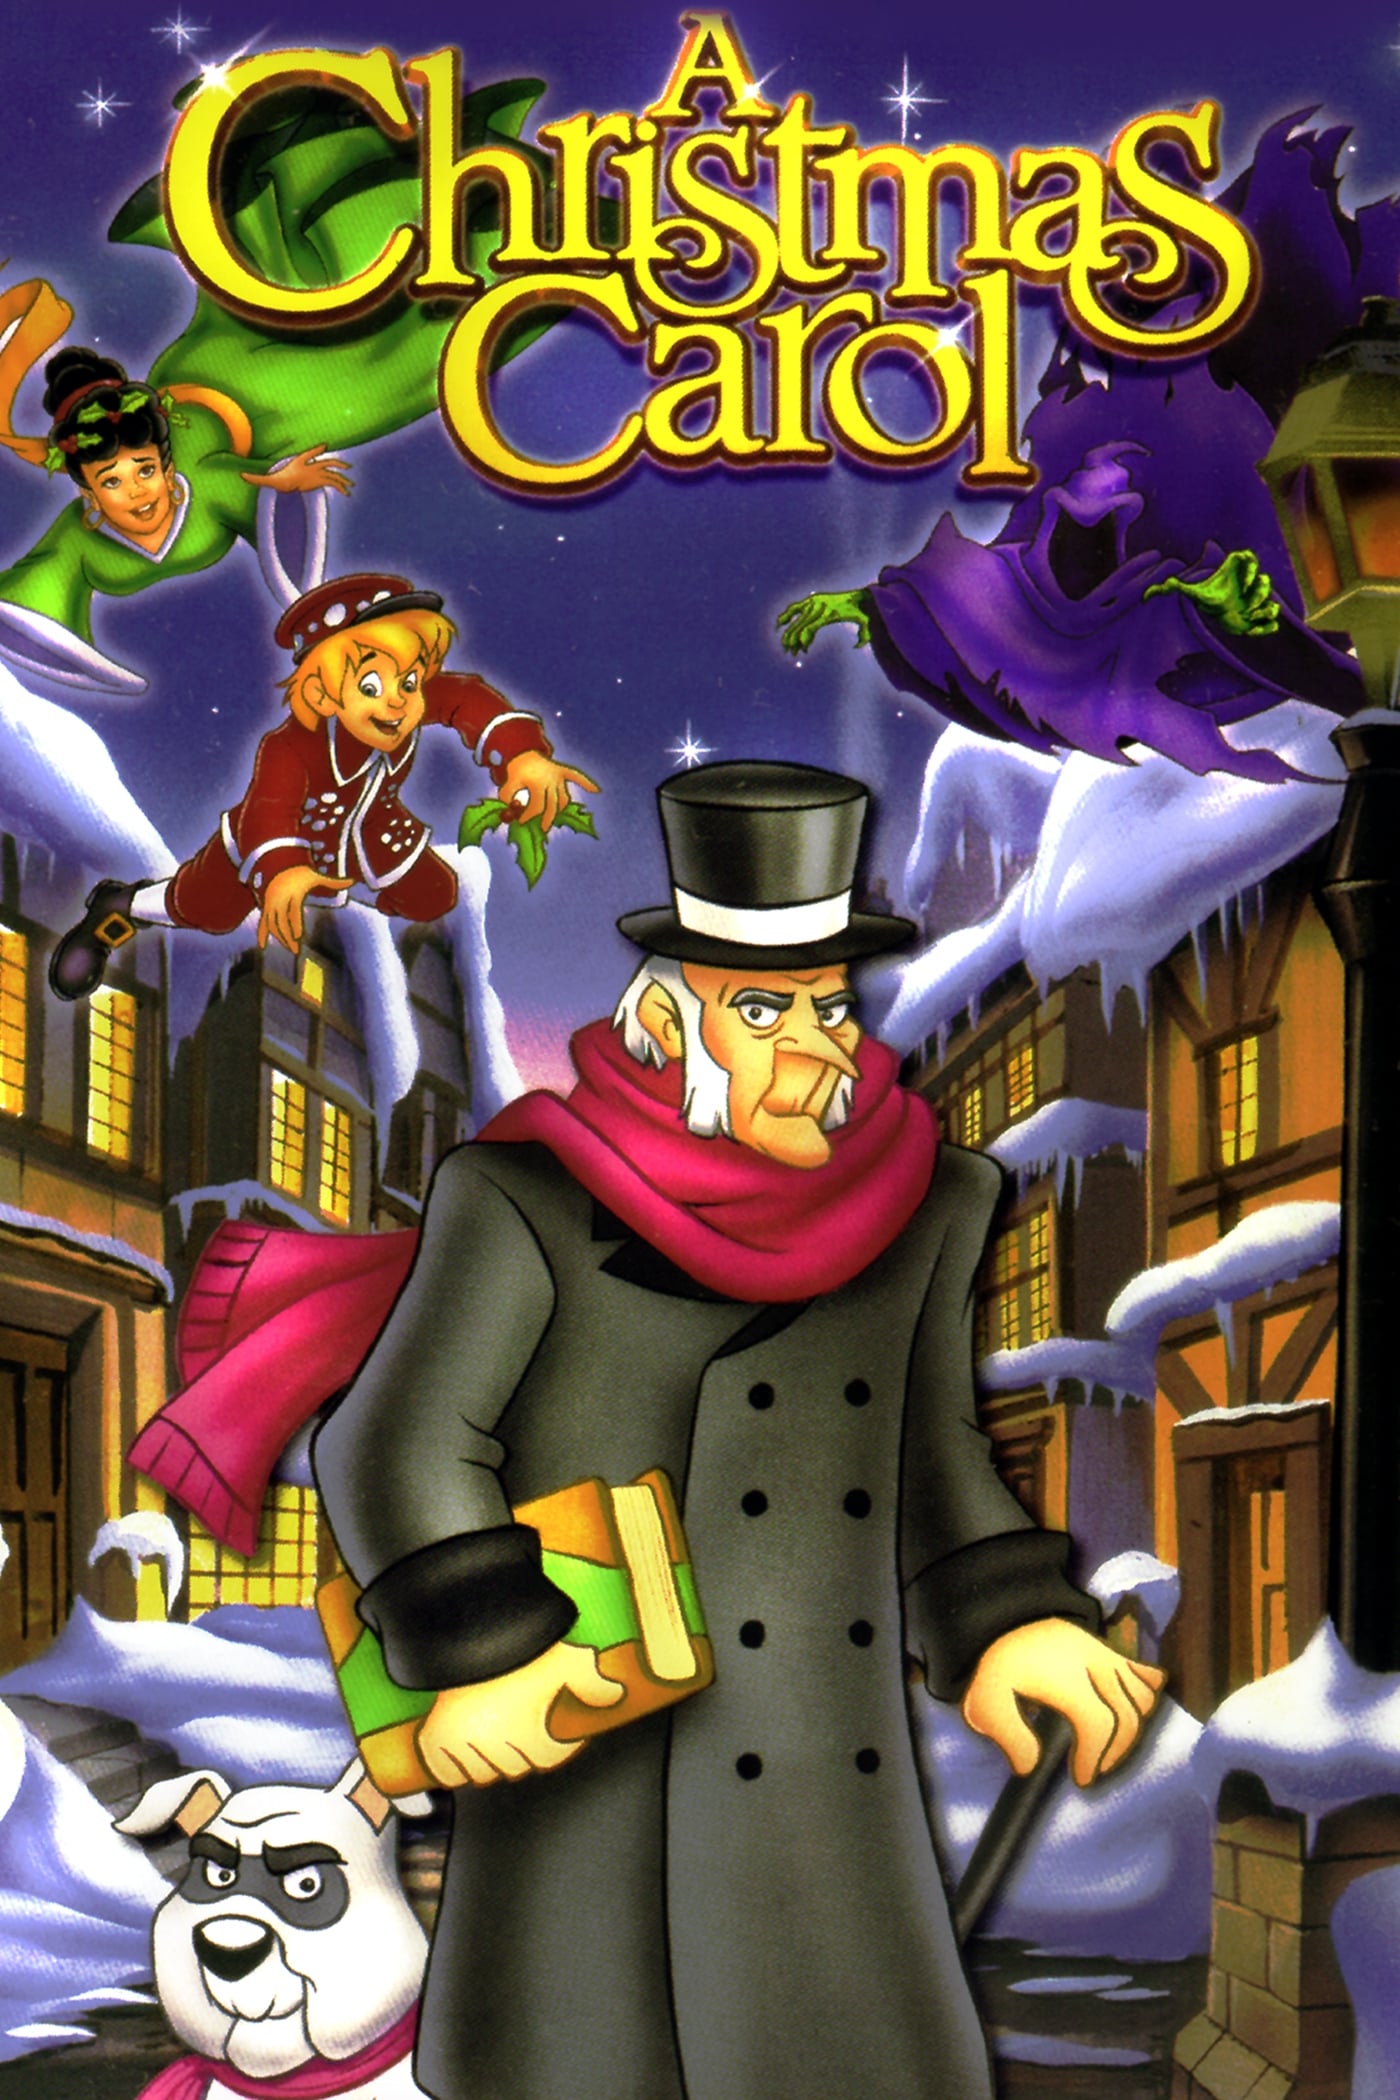 Watch A Christmas Carol (1997) Full Movie Online Free - Watch Movies Online HD Quality